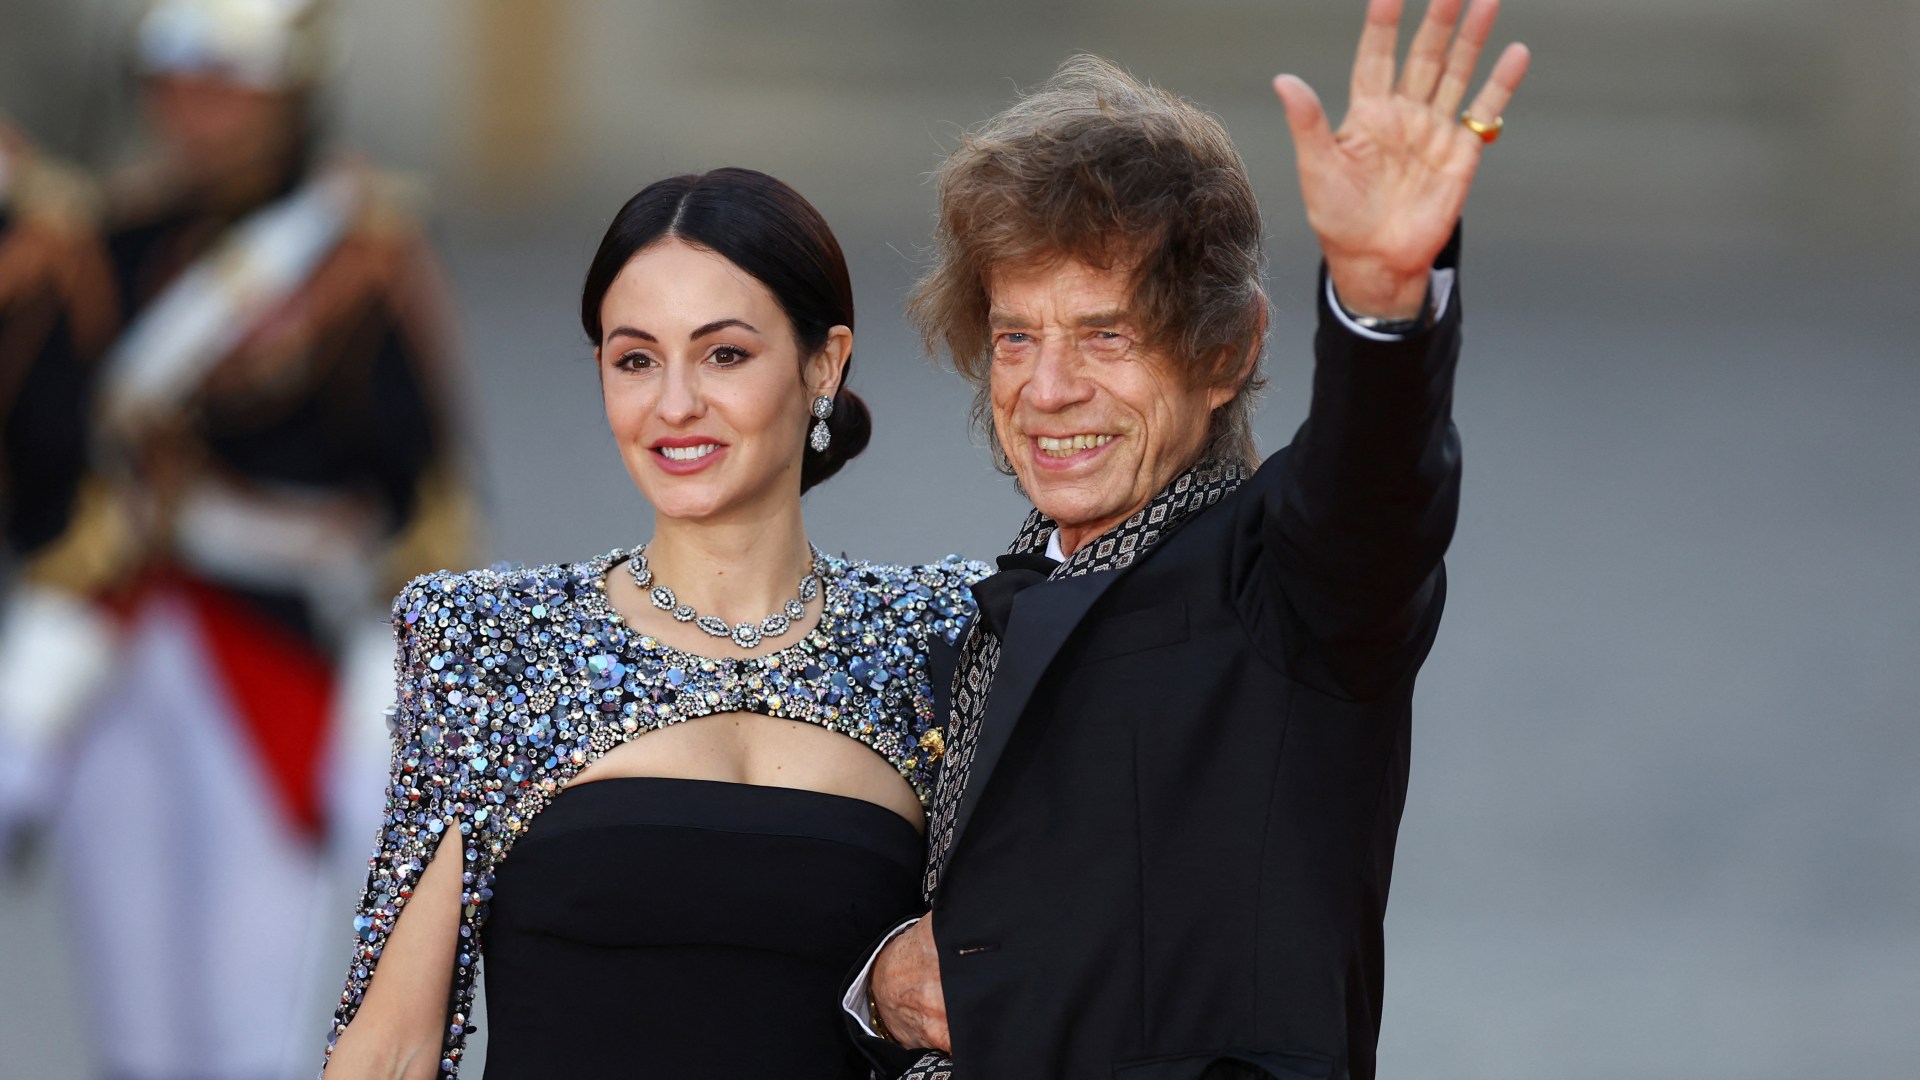 Outrage: Mick Jagger’s Girlfriend Calls Out Instagram for Inaction Against Imposter Son Account